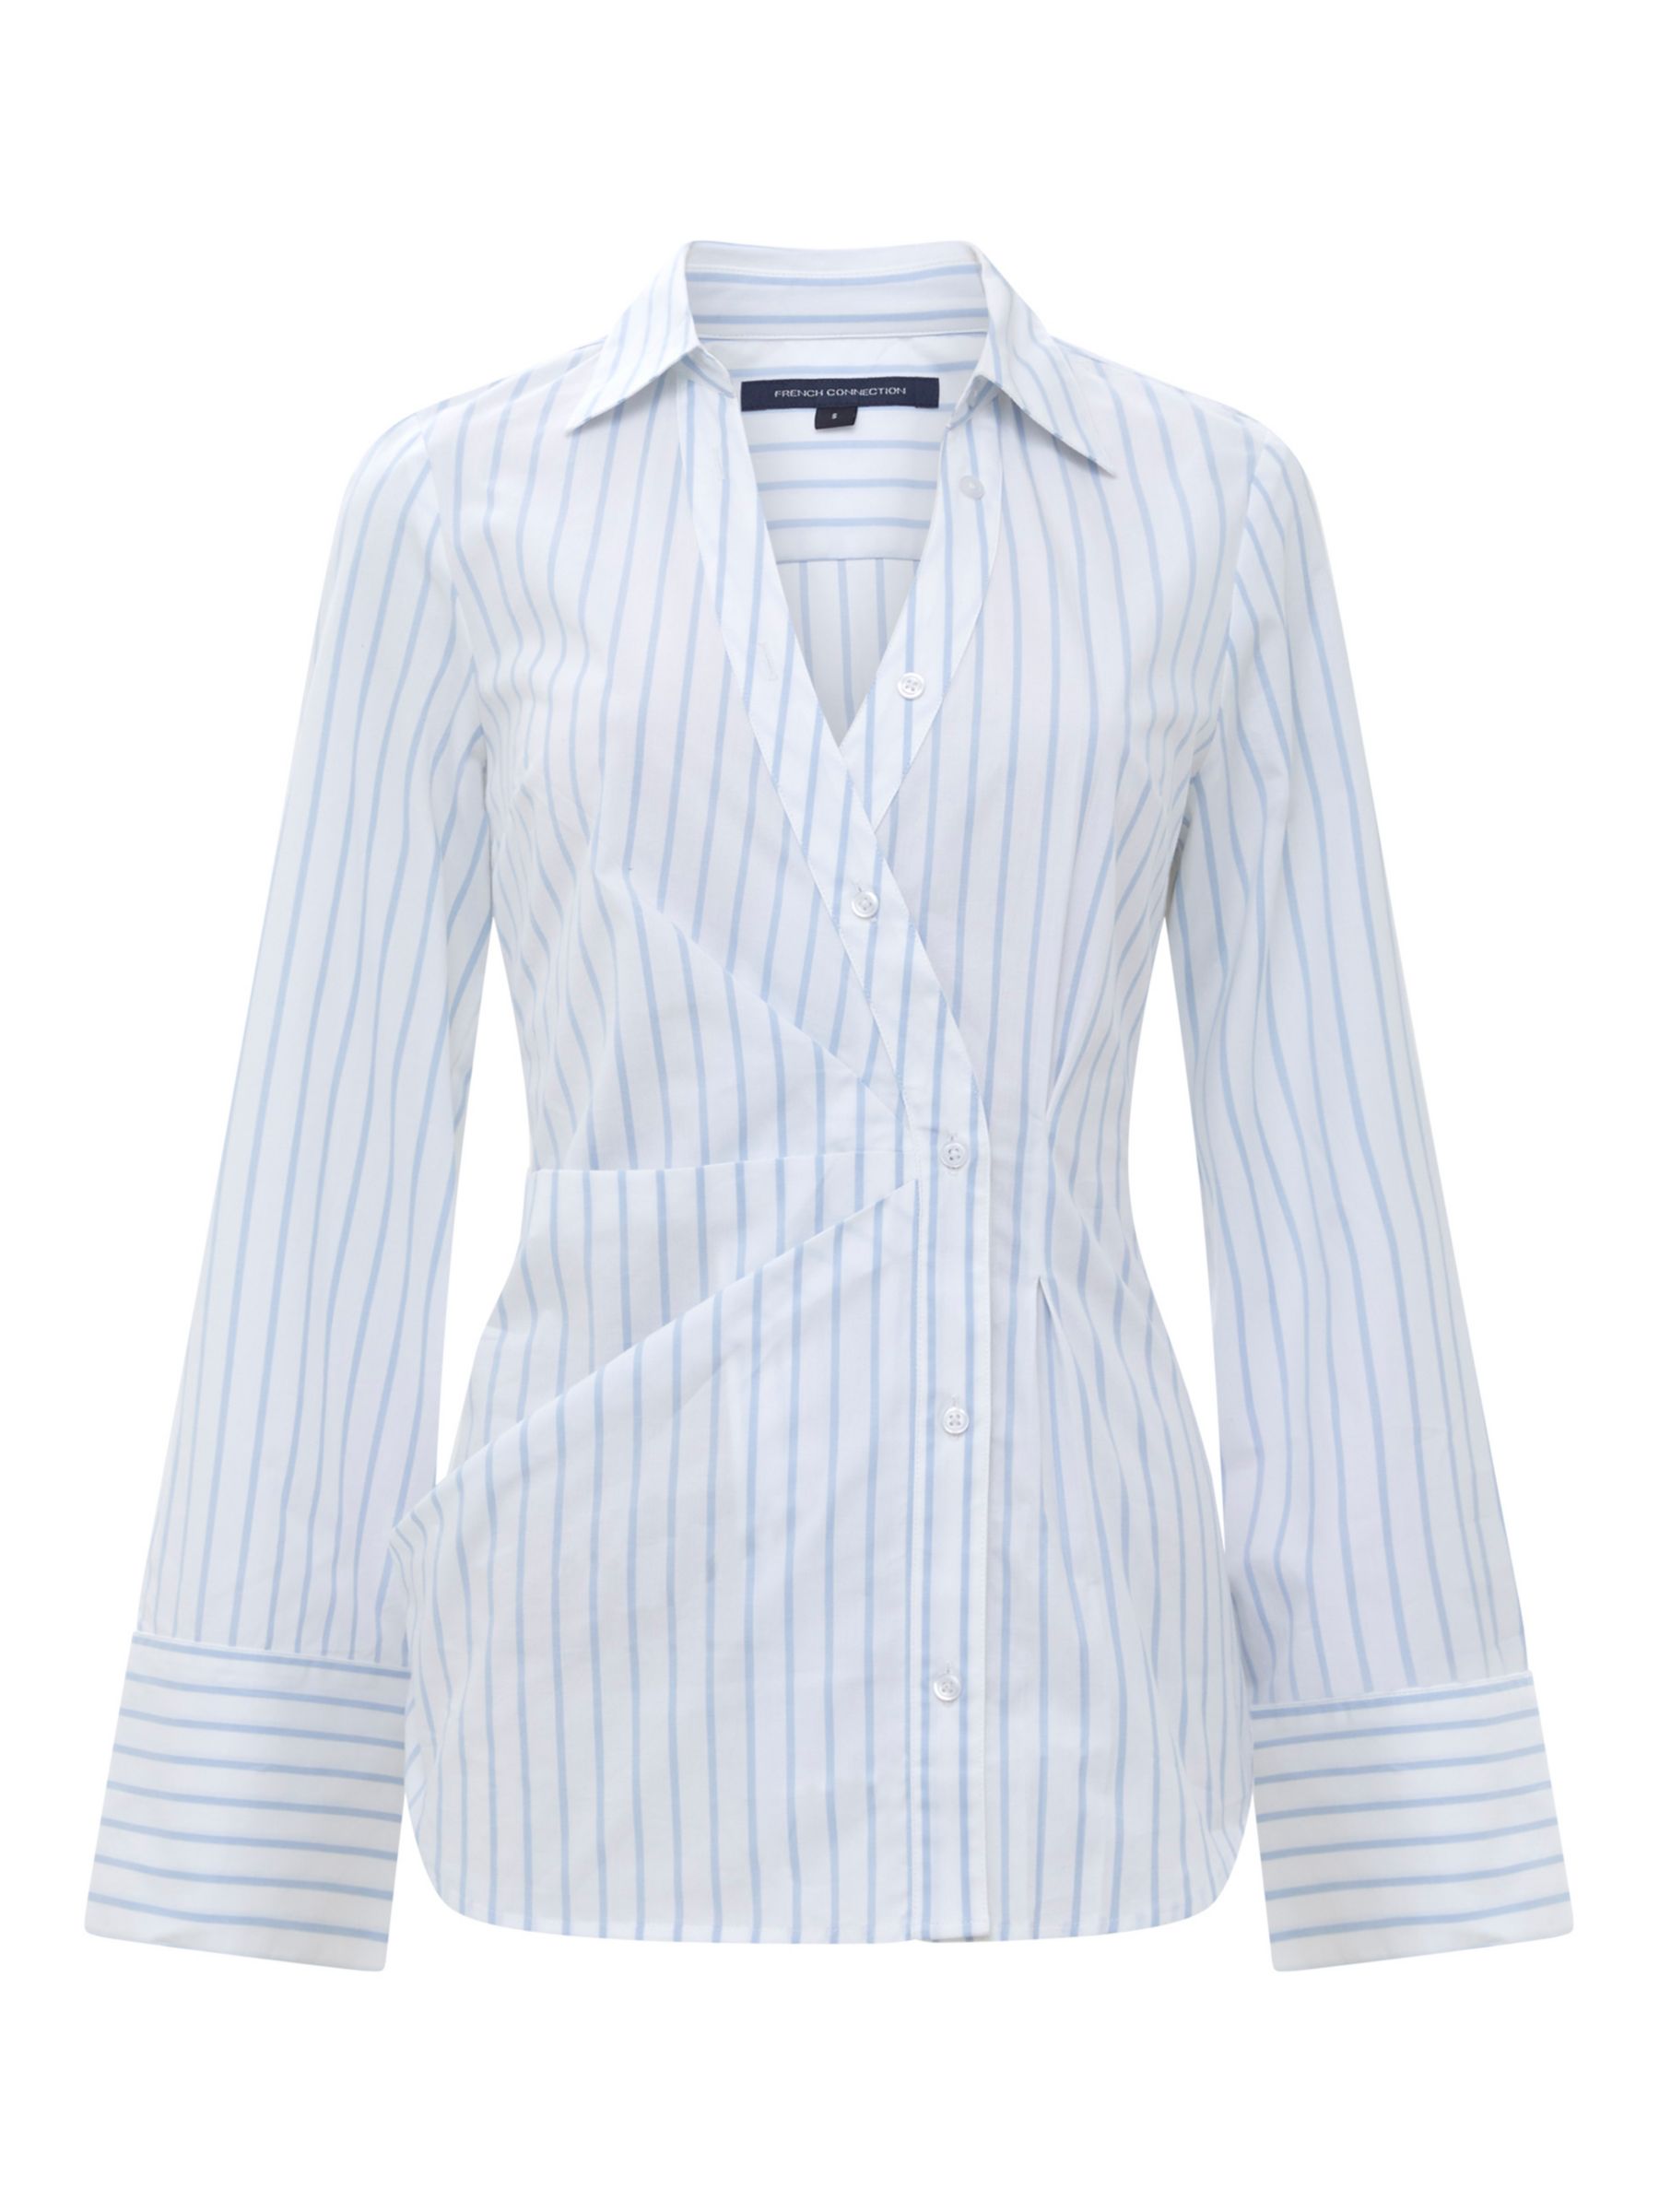 Buy French Connection Isabelle Stripe Cotton Blend Shirt, Linen White/Cashmere Online at johnlewis.com